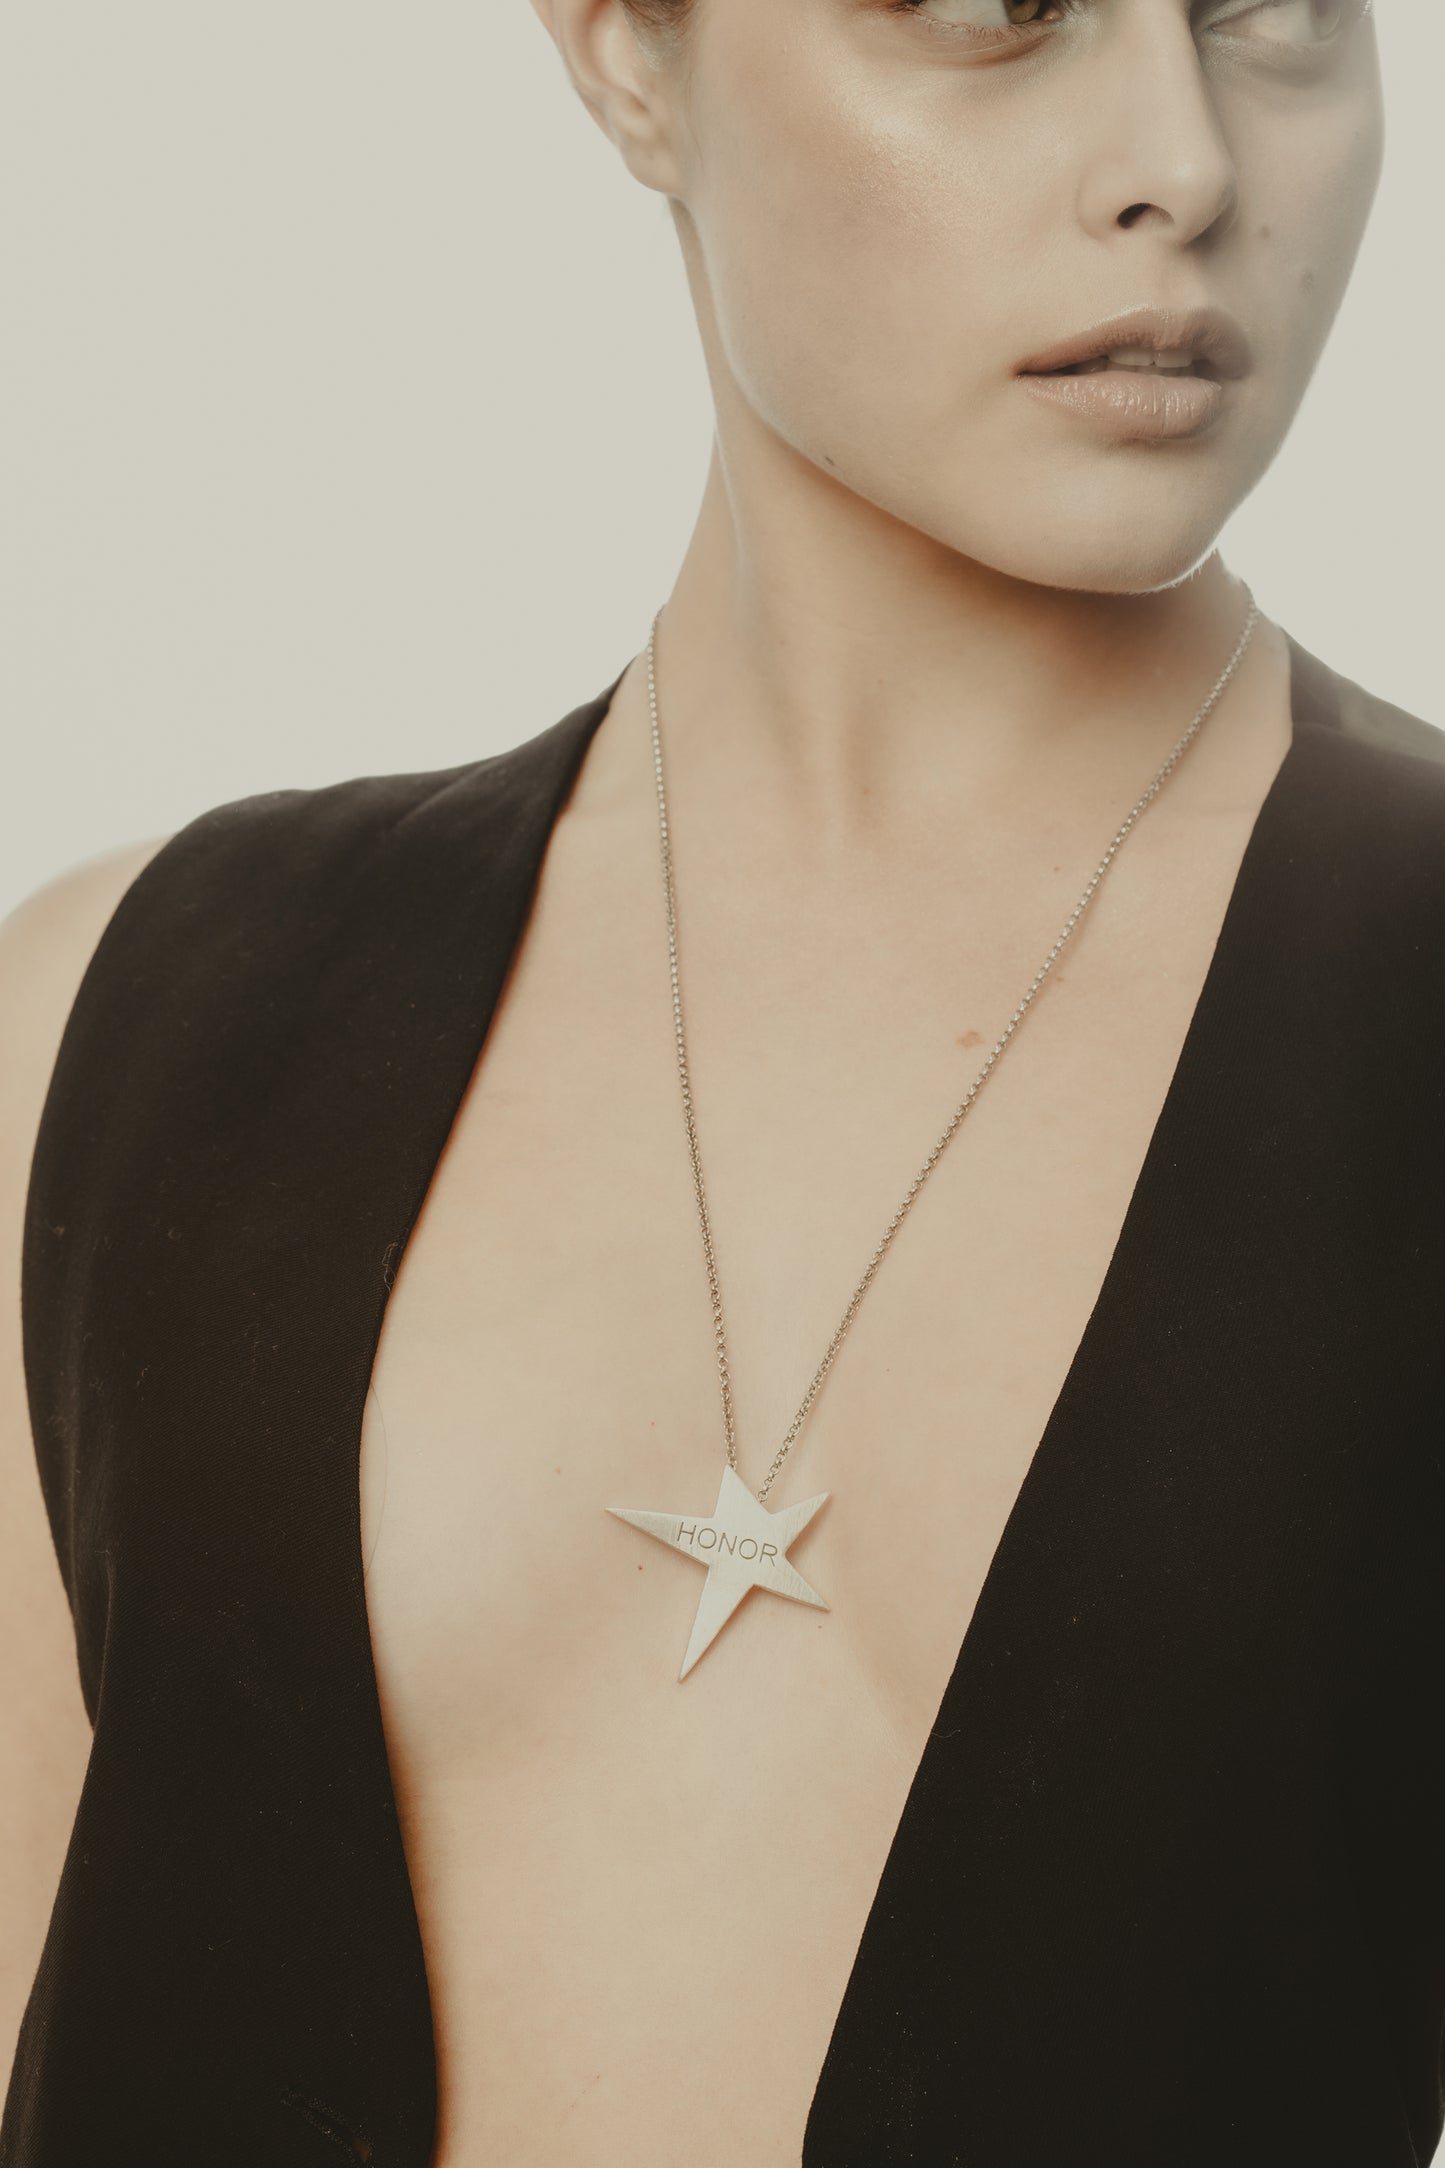 Honor Star Necklace